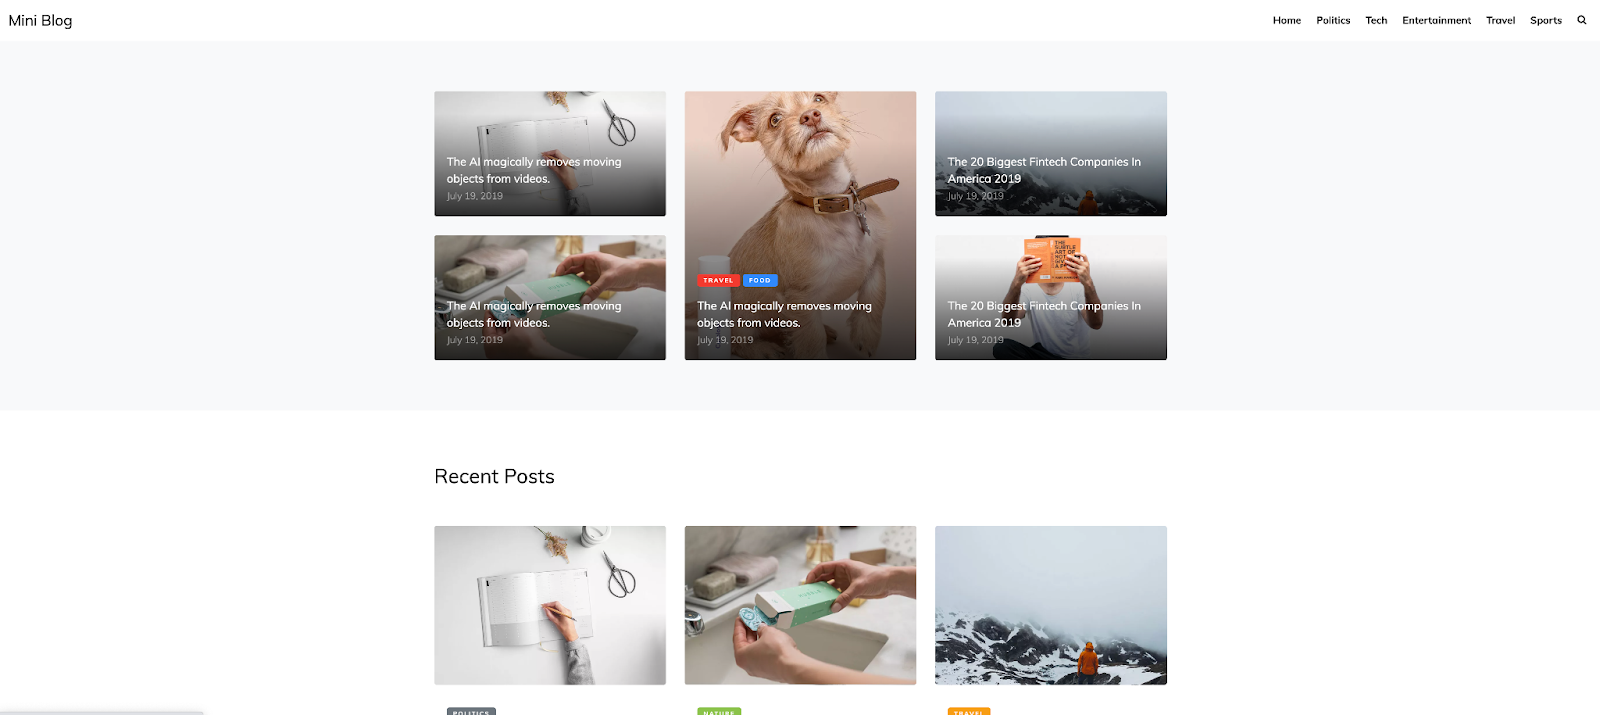 Miniblog is a minimal, clean theme for your next blog that will look good on all devices